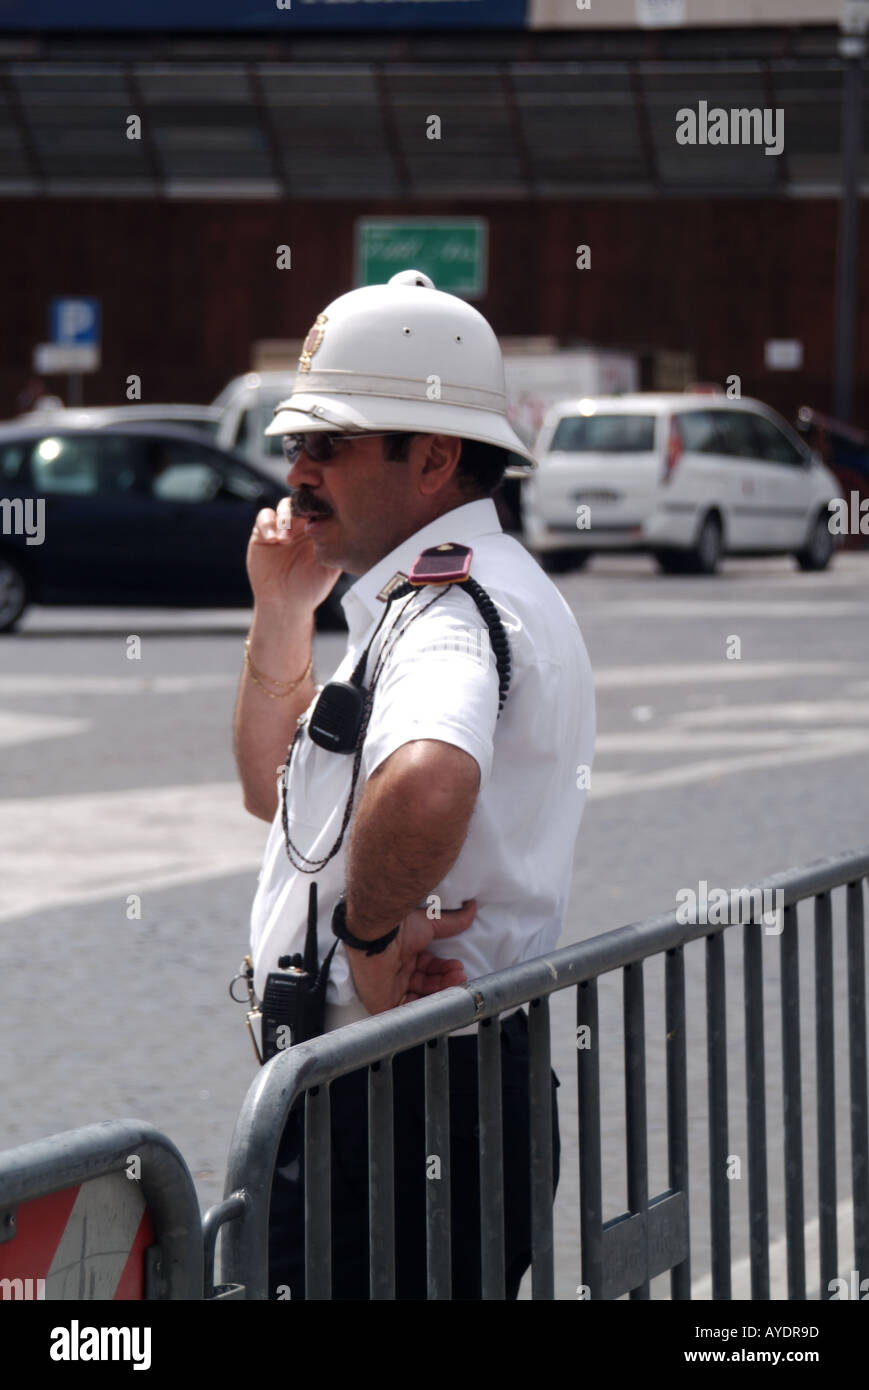 Close up candid view Italian policeman traffic duty in summer uniform hot sunny day wearing a white helmet in Rome adjacent to St Peters Square Italy Stock Photo